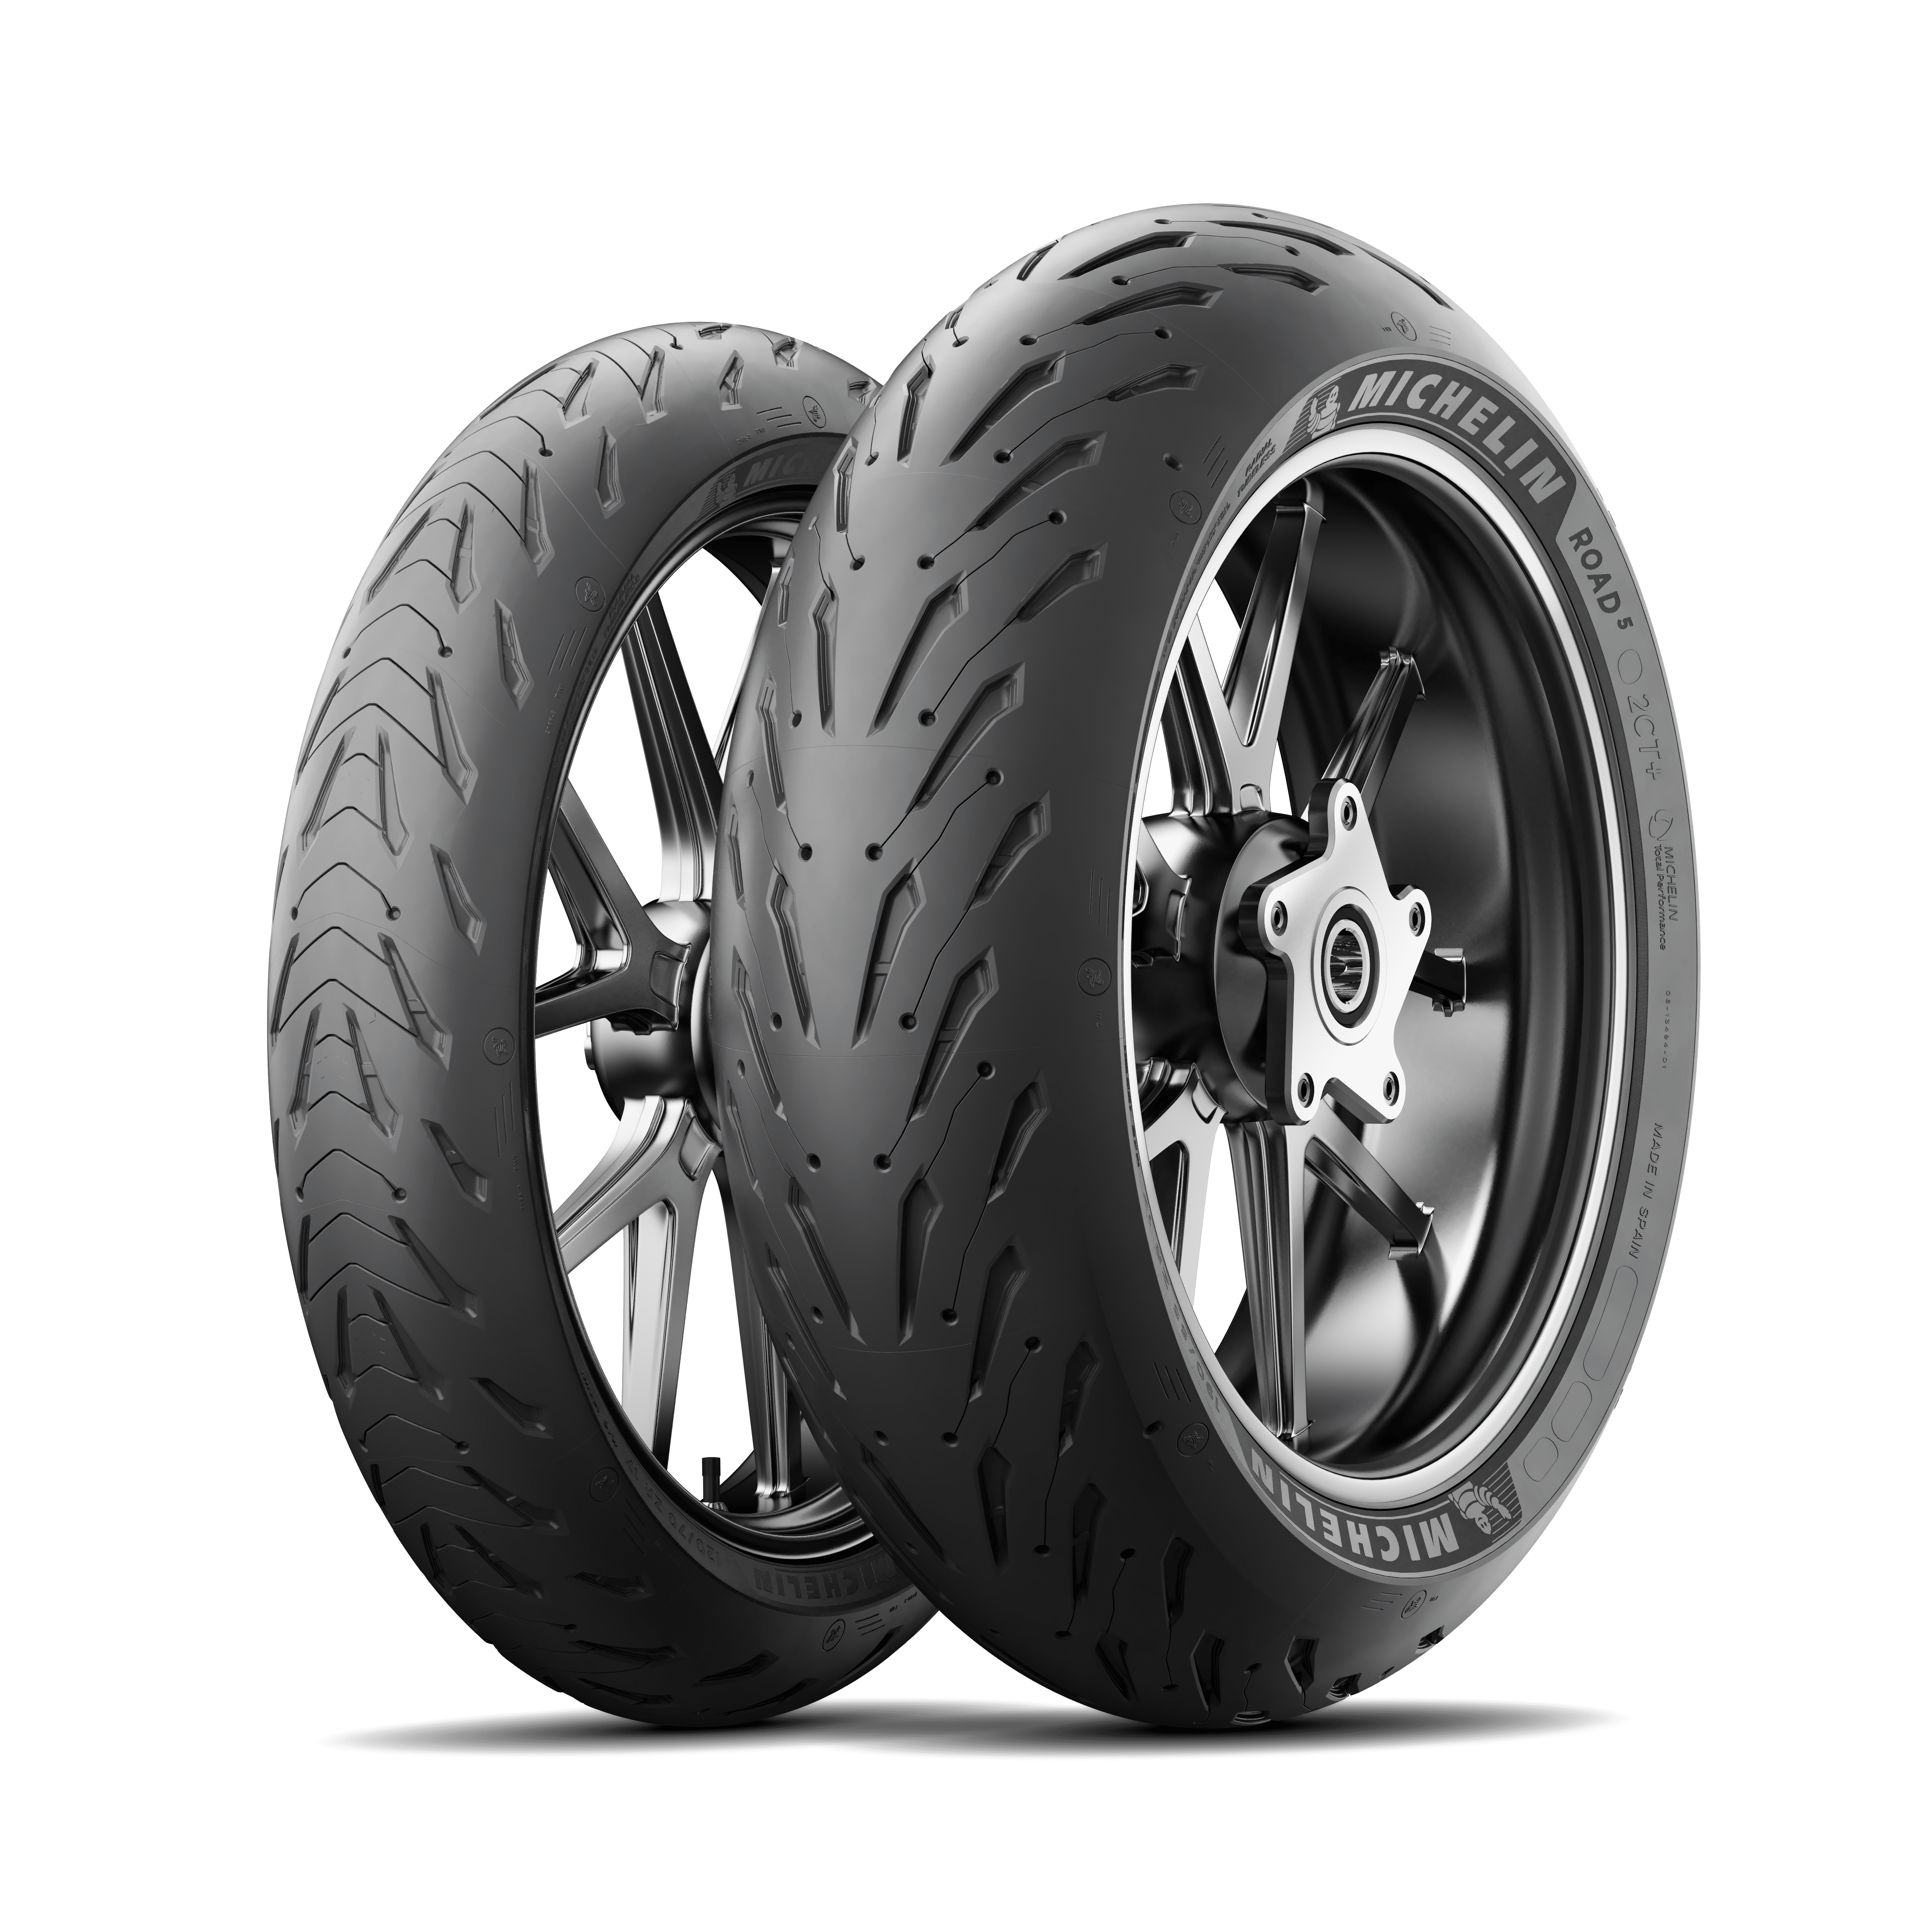 MICHELIN ROAD 5 - Motorcycle Tire | MICHELIN USA